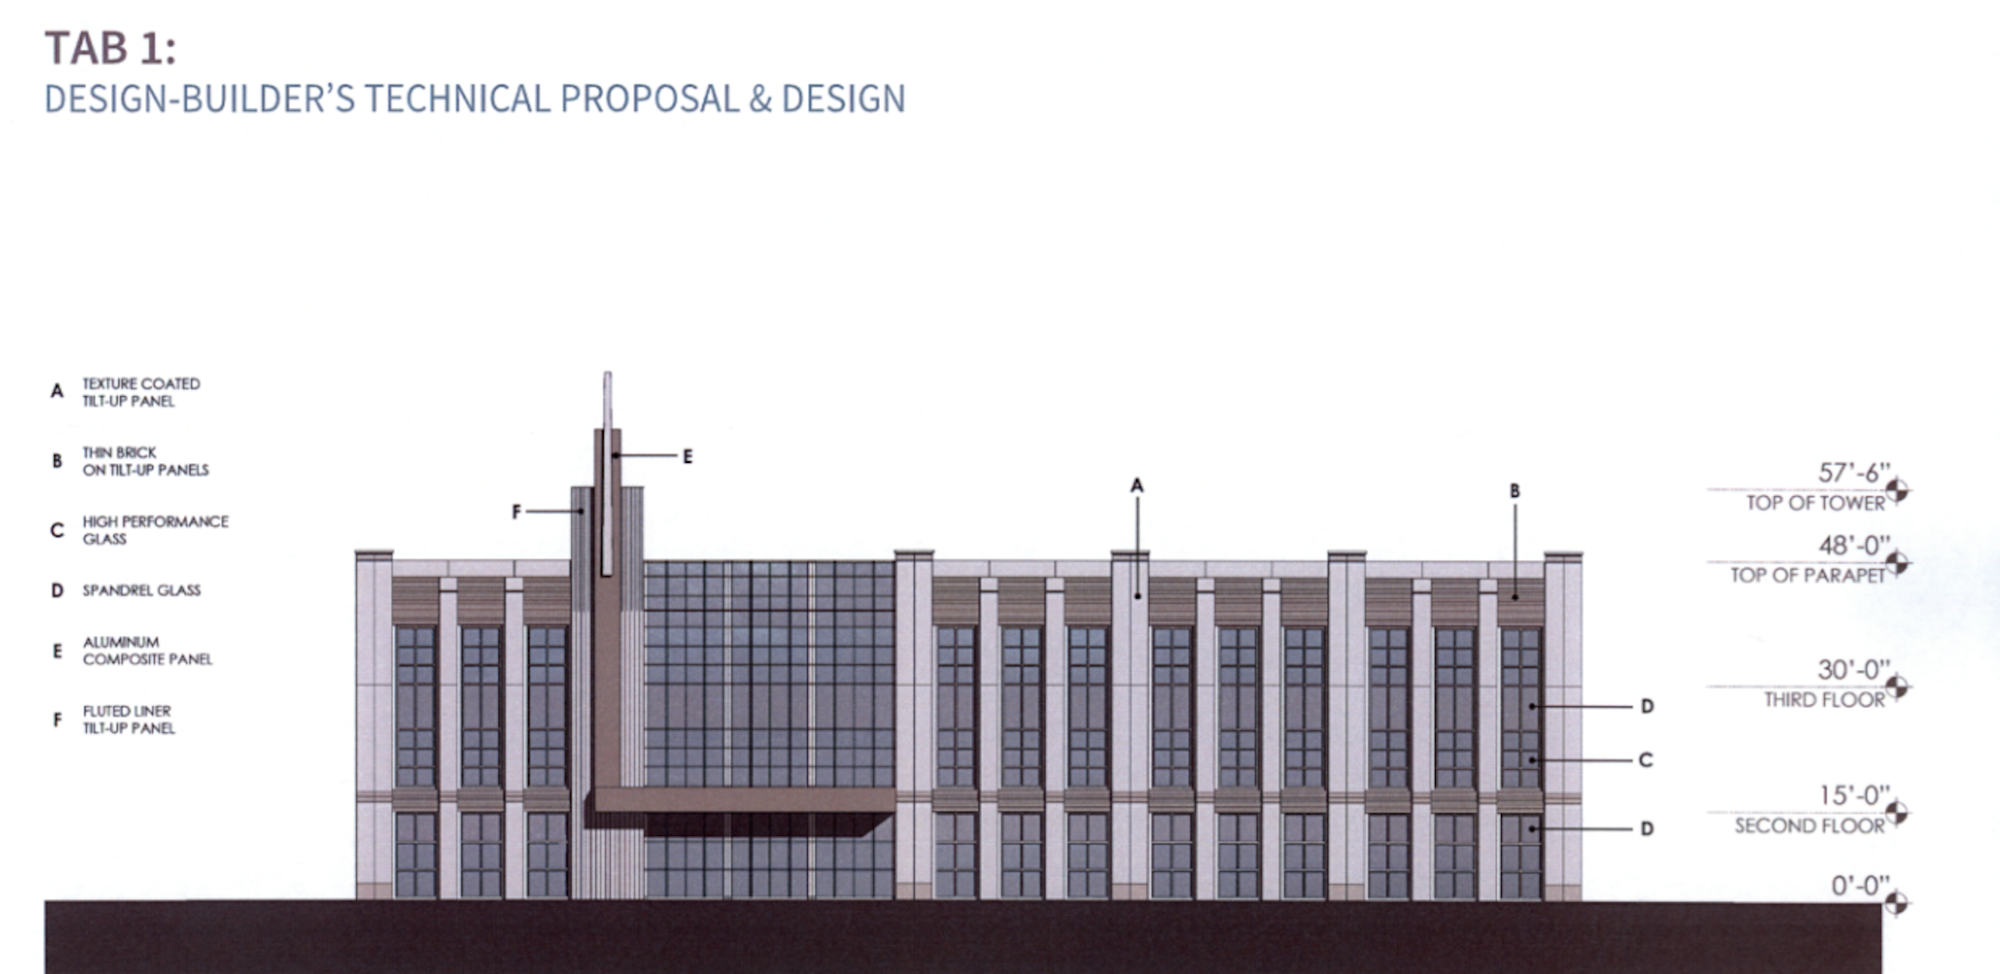 This is the city hall design that Wharton-Smith, Inc. and HunterBrady Architects submitted as part of the Request for Proposal process for the new City Hall. This is not a final design for the building.